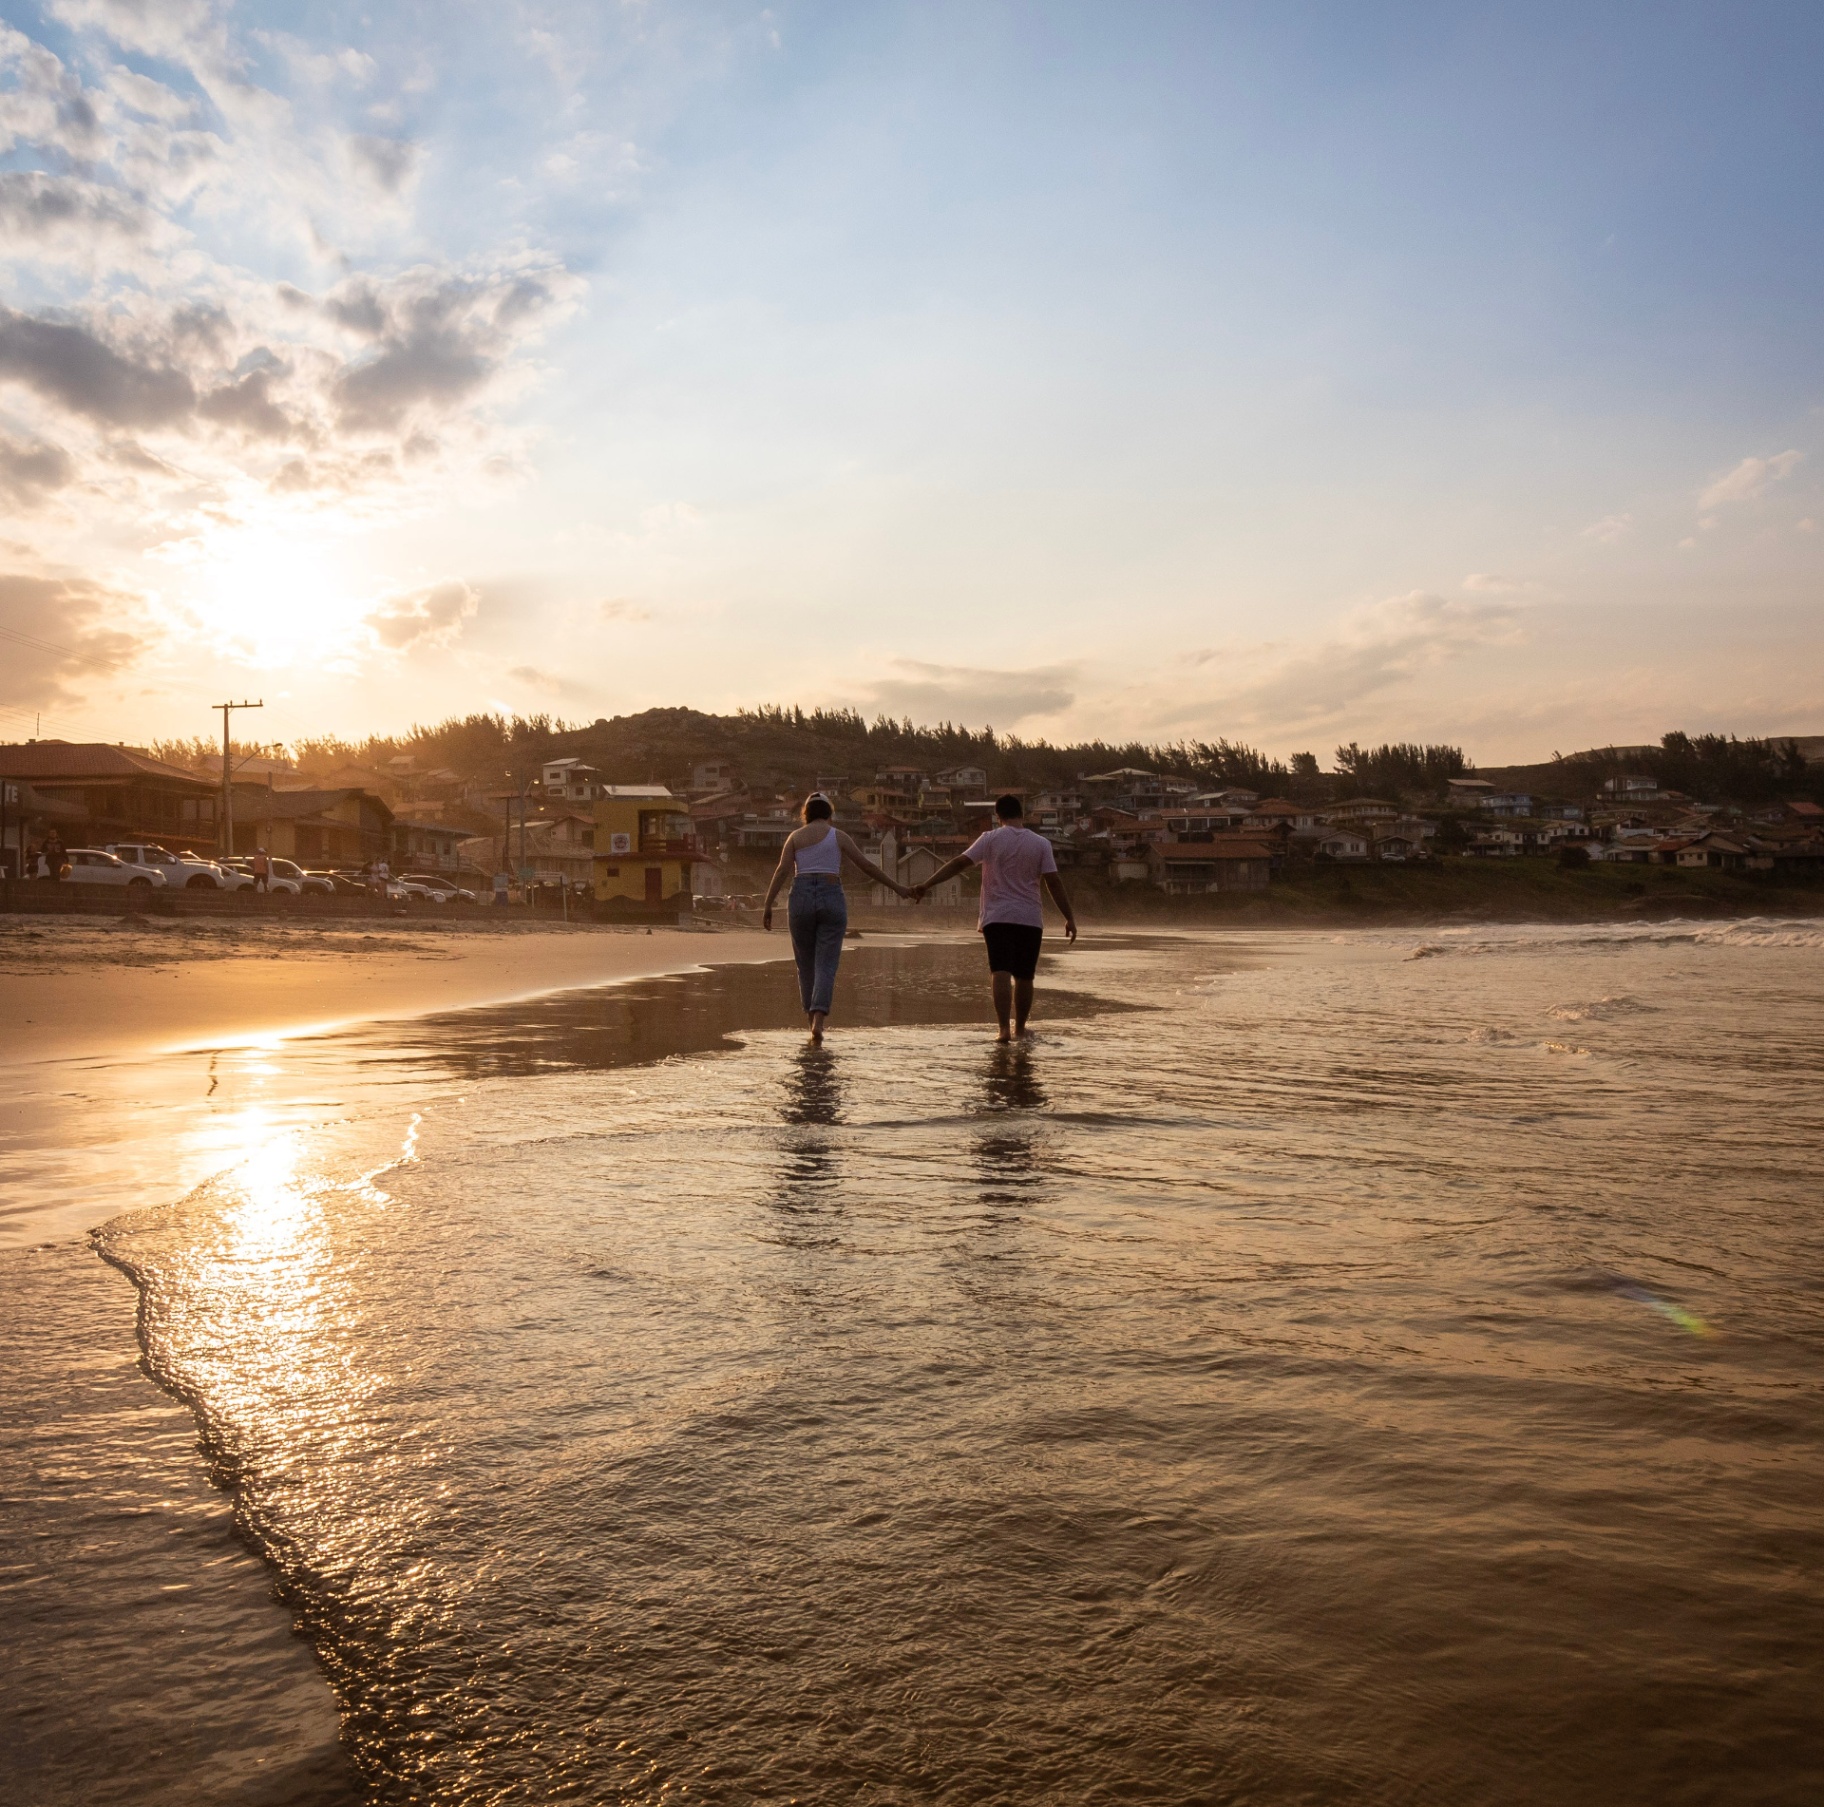 Image of a couple walking along the beach holding hands during sunset. Learn how to effectively cope and manage your seizures with the help of adult neuropsychological evaluations in Saint Petersburg, FL.